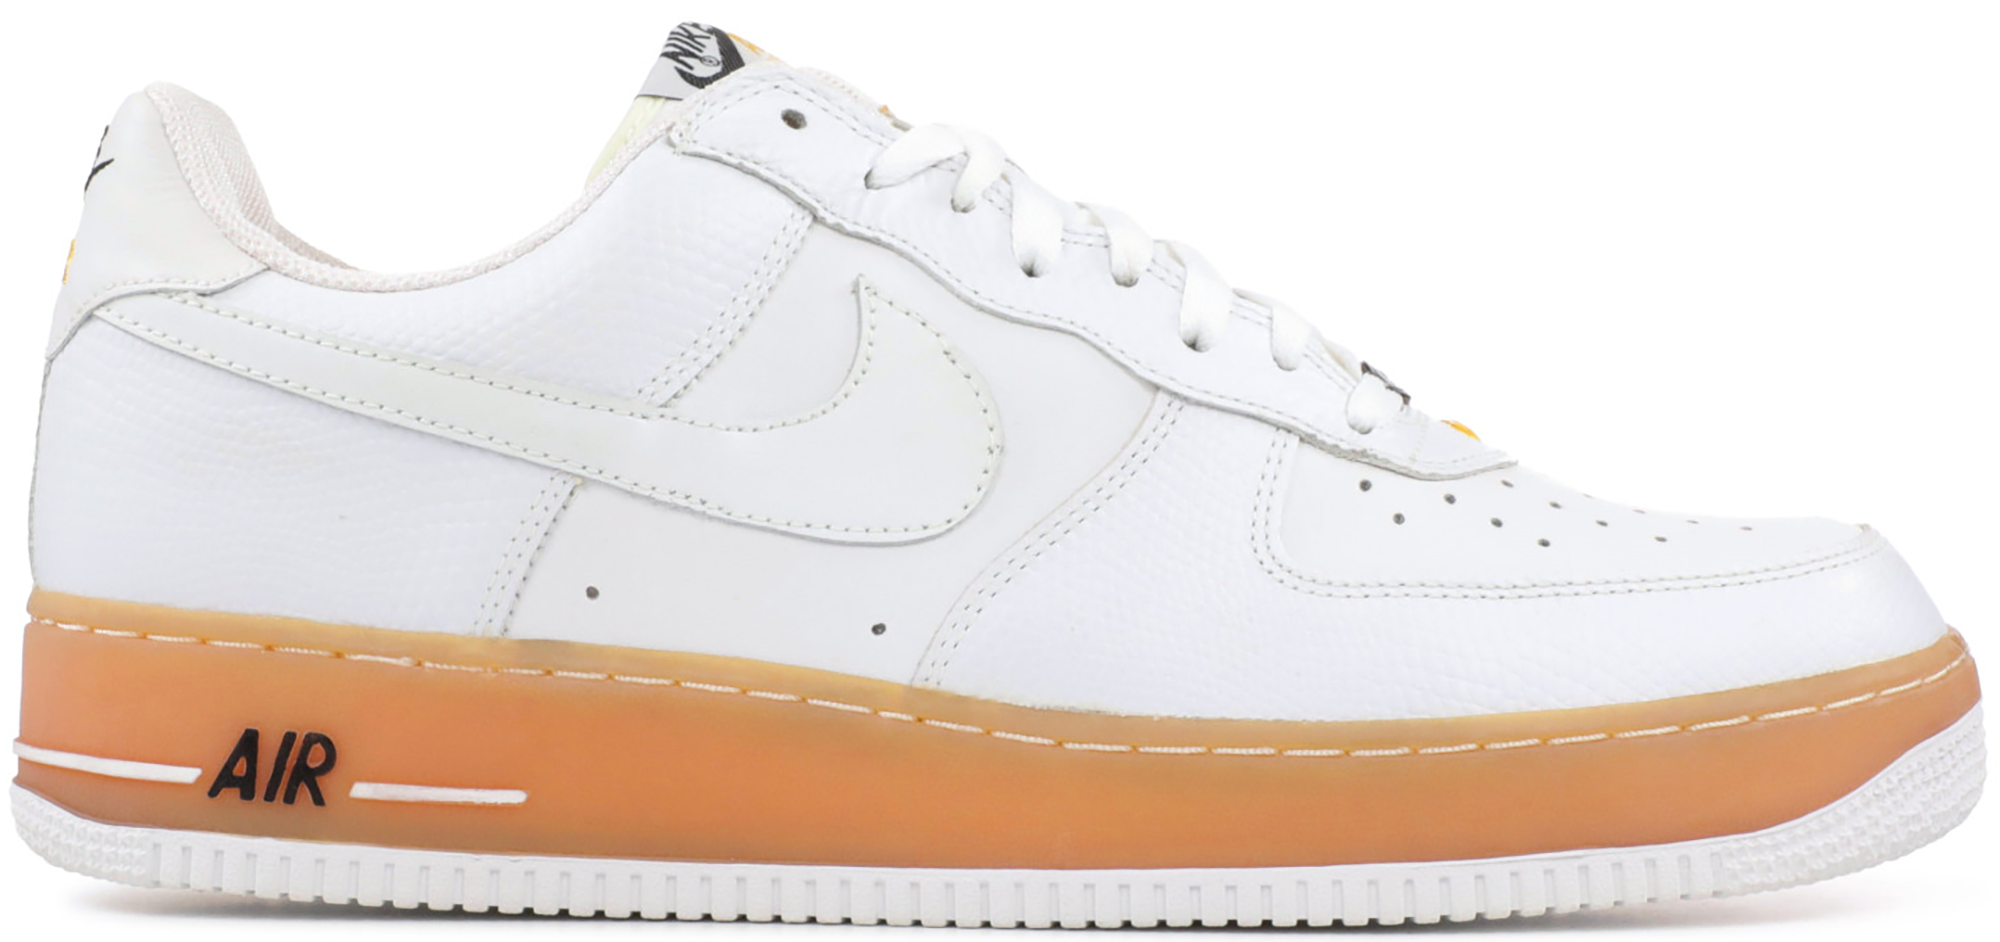 Nike Air Force 1 Low JD Sports White Gum Midsole - 306353-902